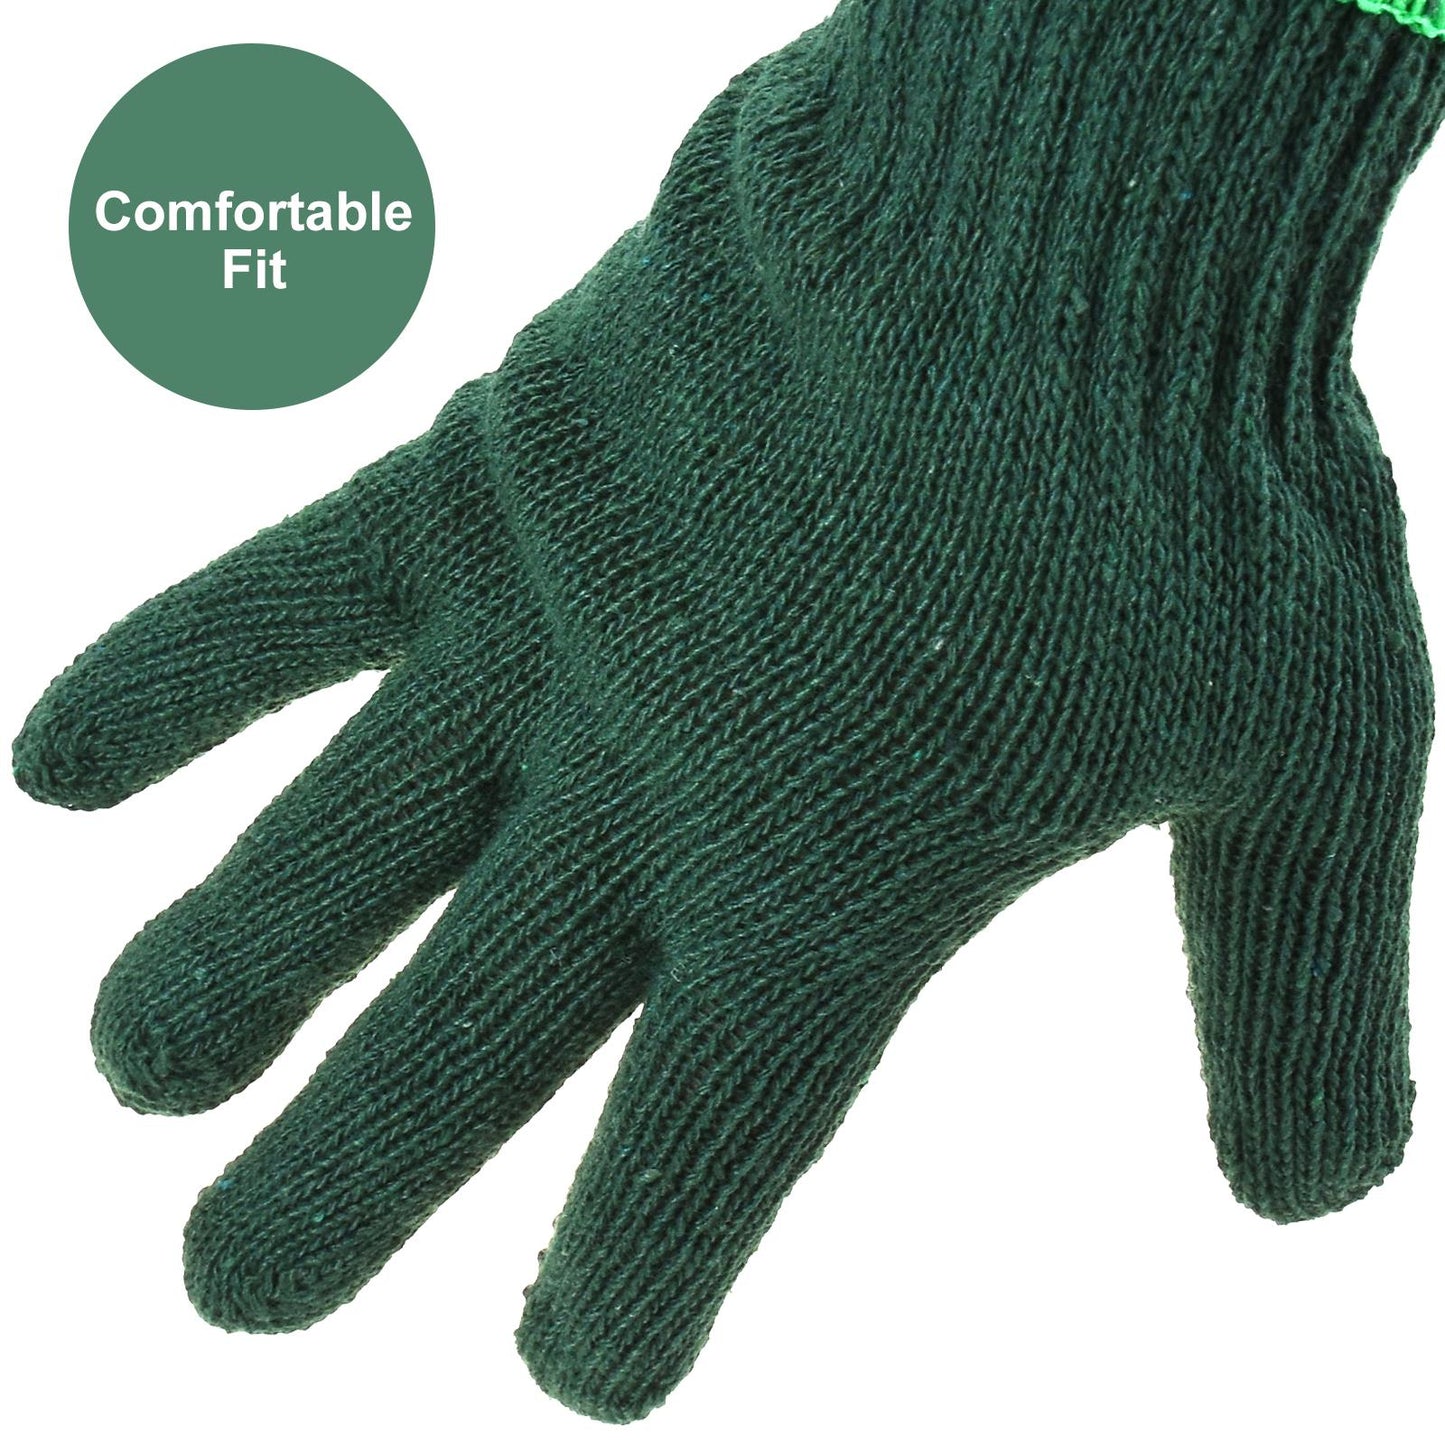 Durable And Comfortable Gloves For Women To Use For Gardening And Diy